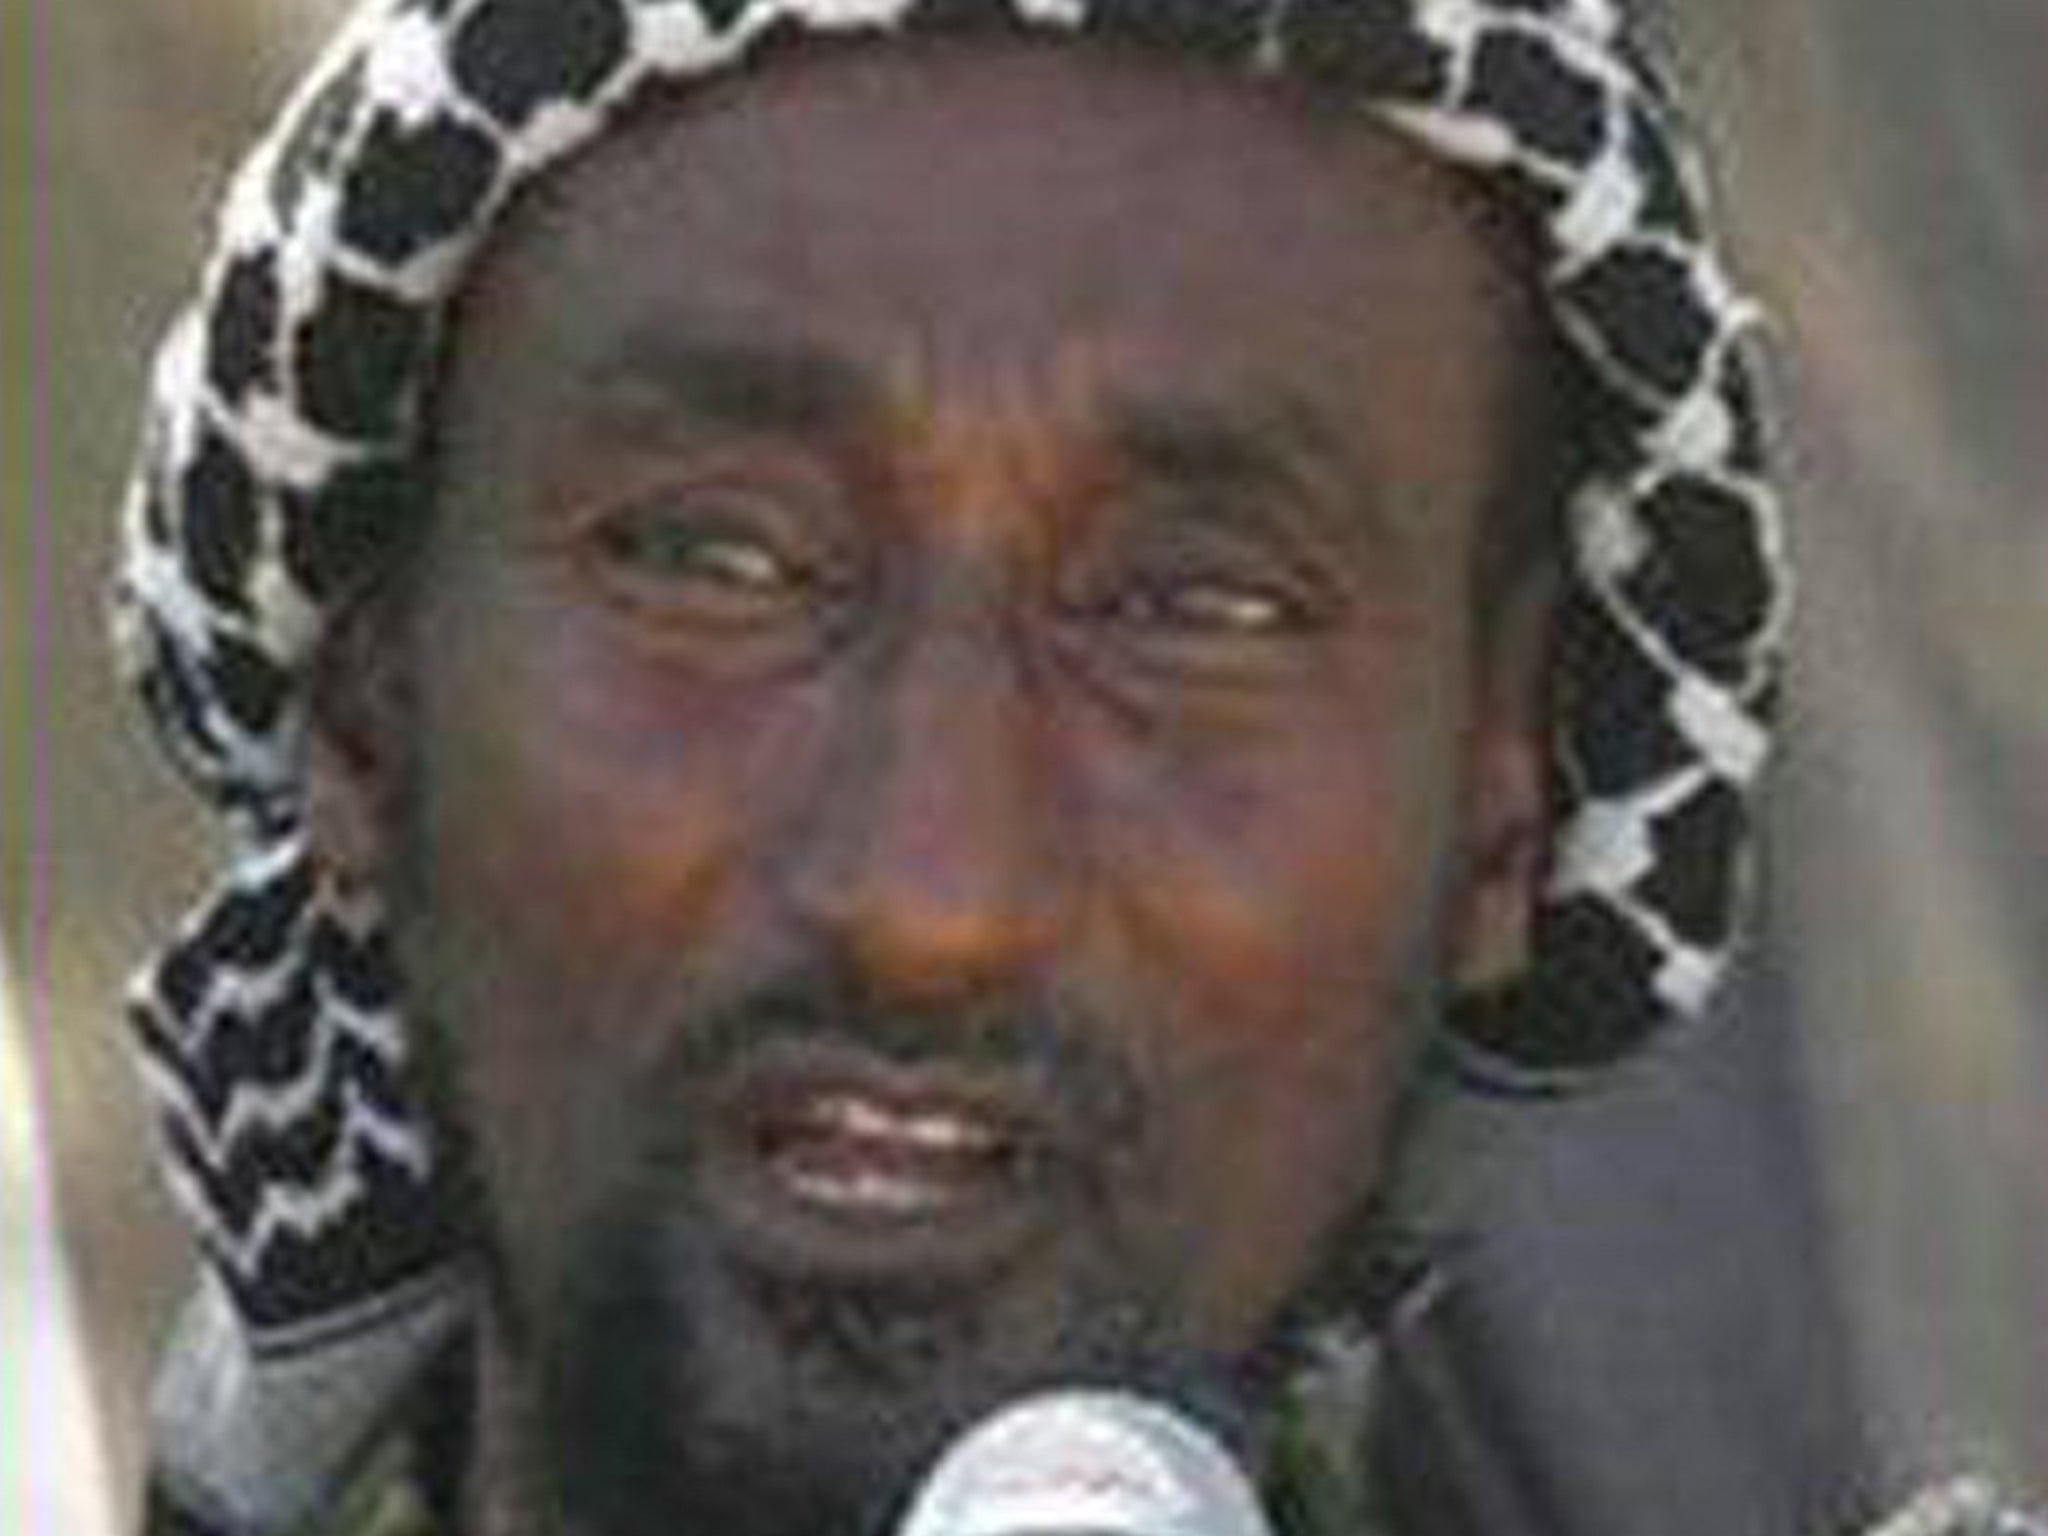 A bounty has been placed on Mohamed Mohamud’s head